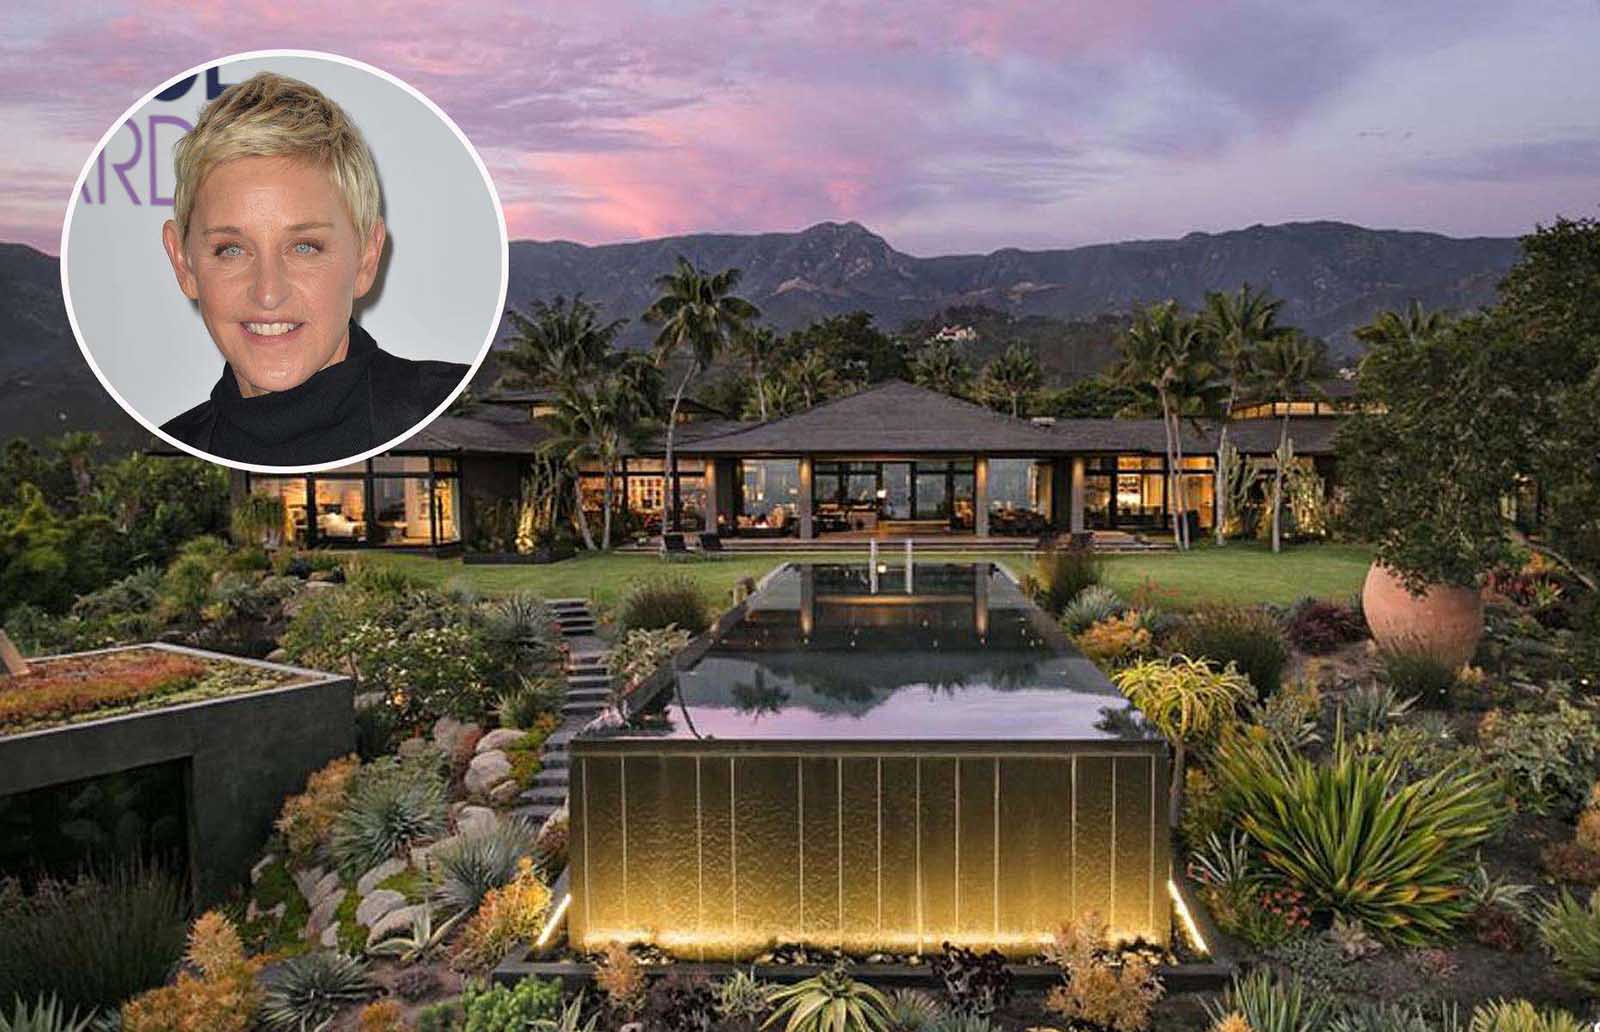 Unknown to most people, Ellen DeGeneres has made a name for herself in the house flipping business. So what houses does she actually still own?